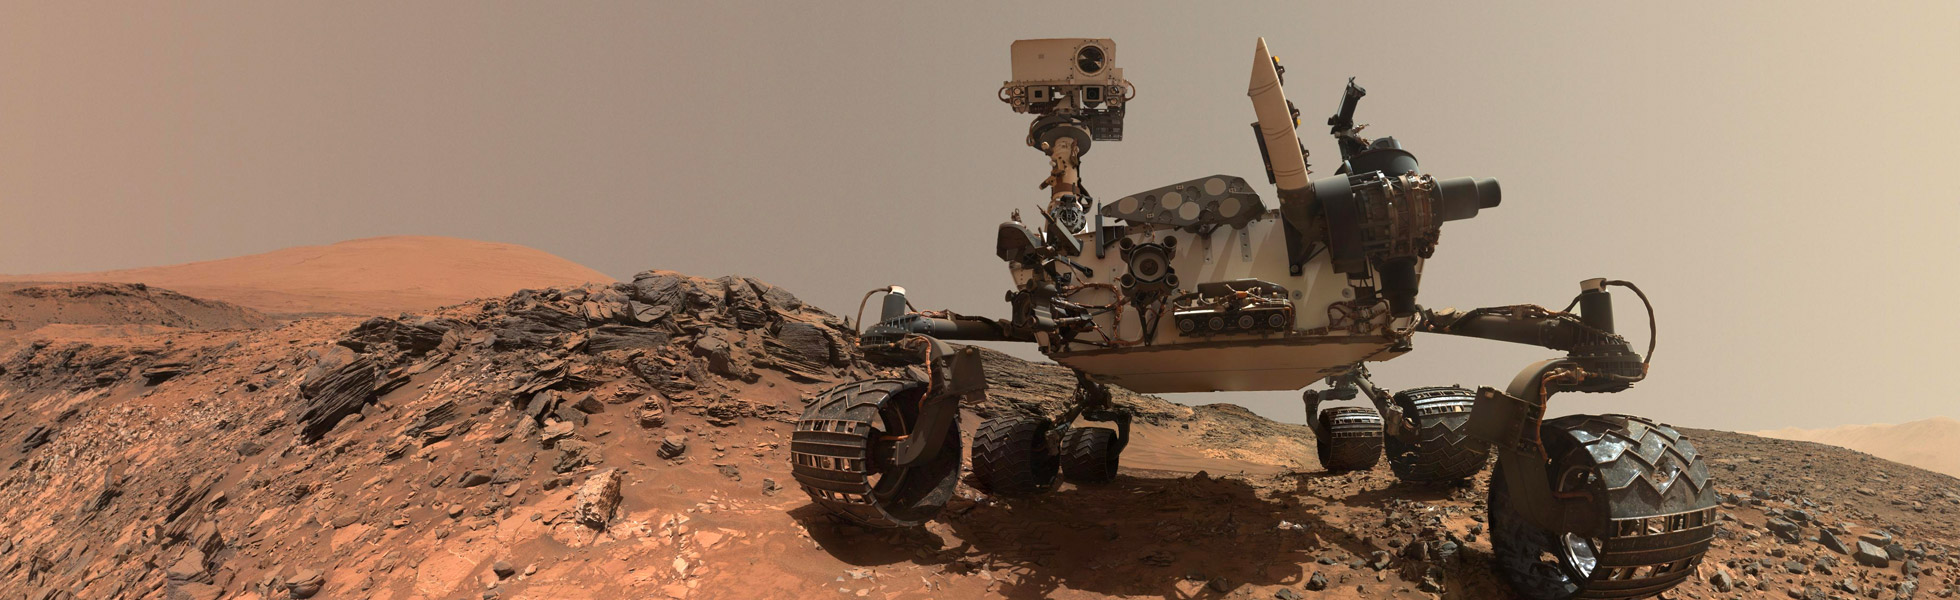 Rover on Mars, awaiting instructions